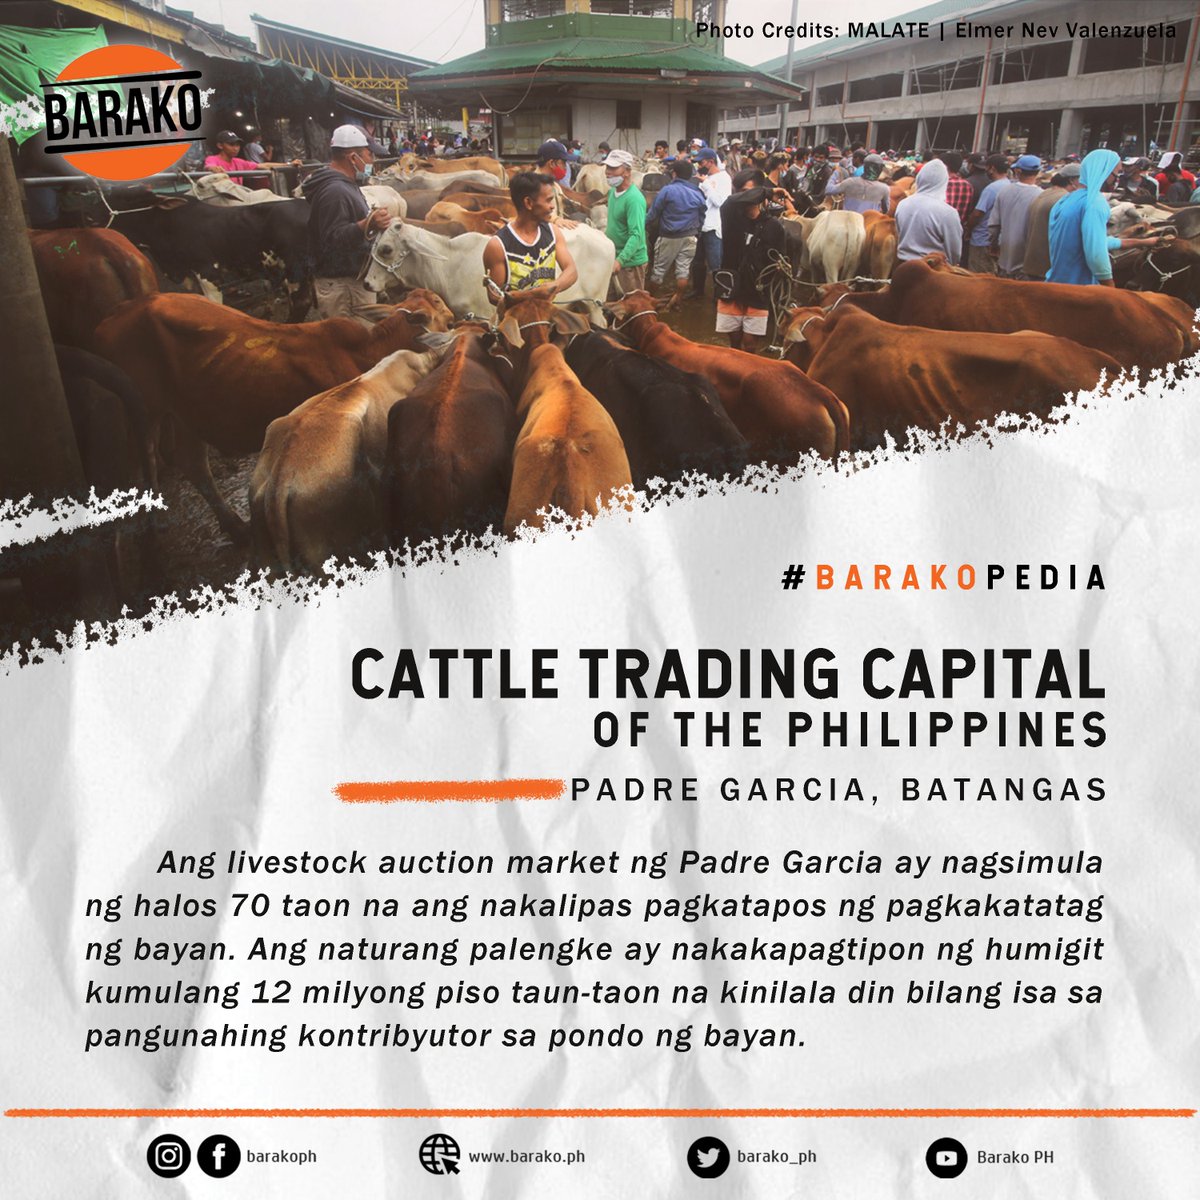 Padre Garcia continues to be renowned as the Philippines' 'Cattle Trading Capital.'
The tradition of livestock auctions in Padre Garcia began over 70 years ago, following the town's establishment.
#Batangas #PadreGarciaBatangas
#BarakPH